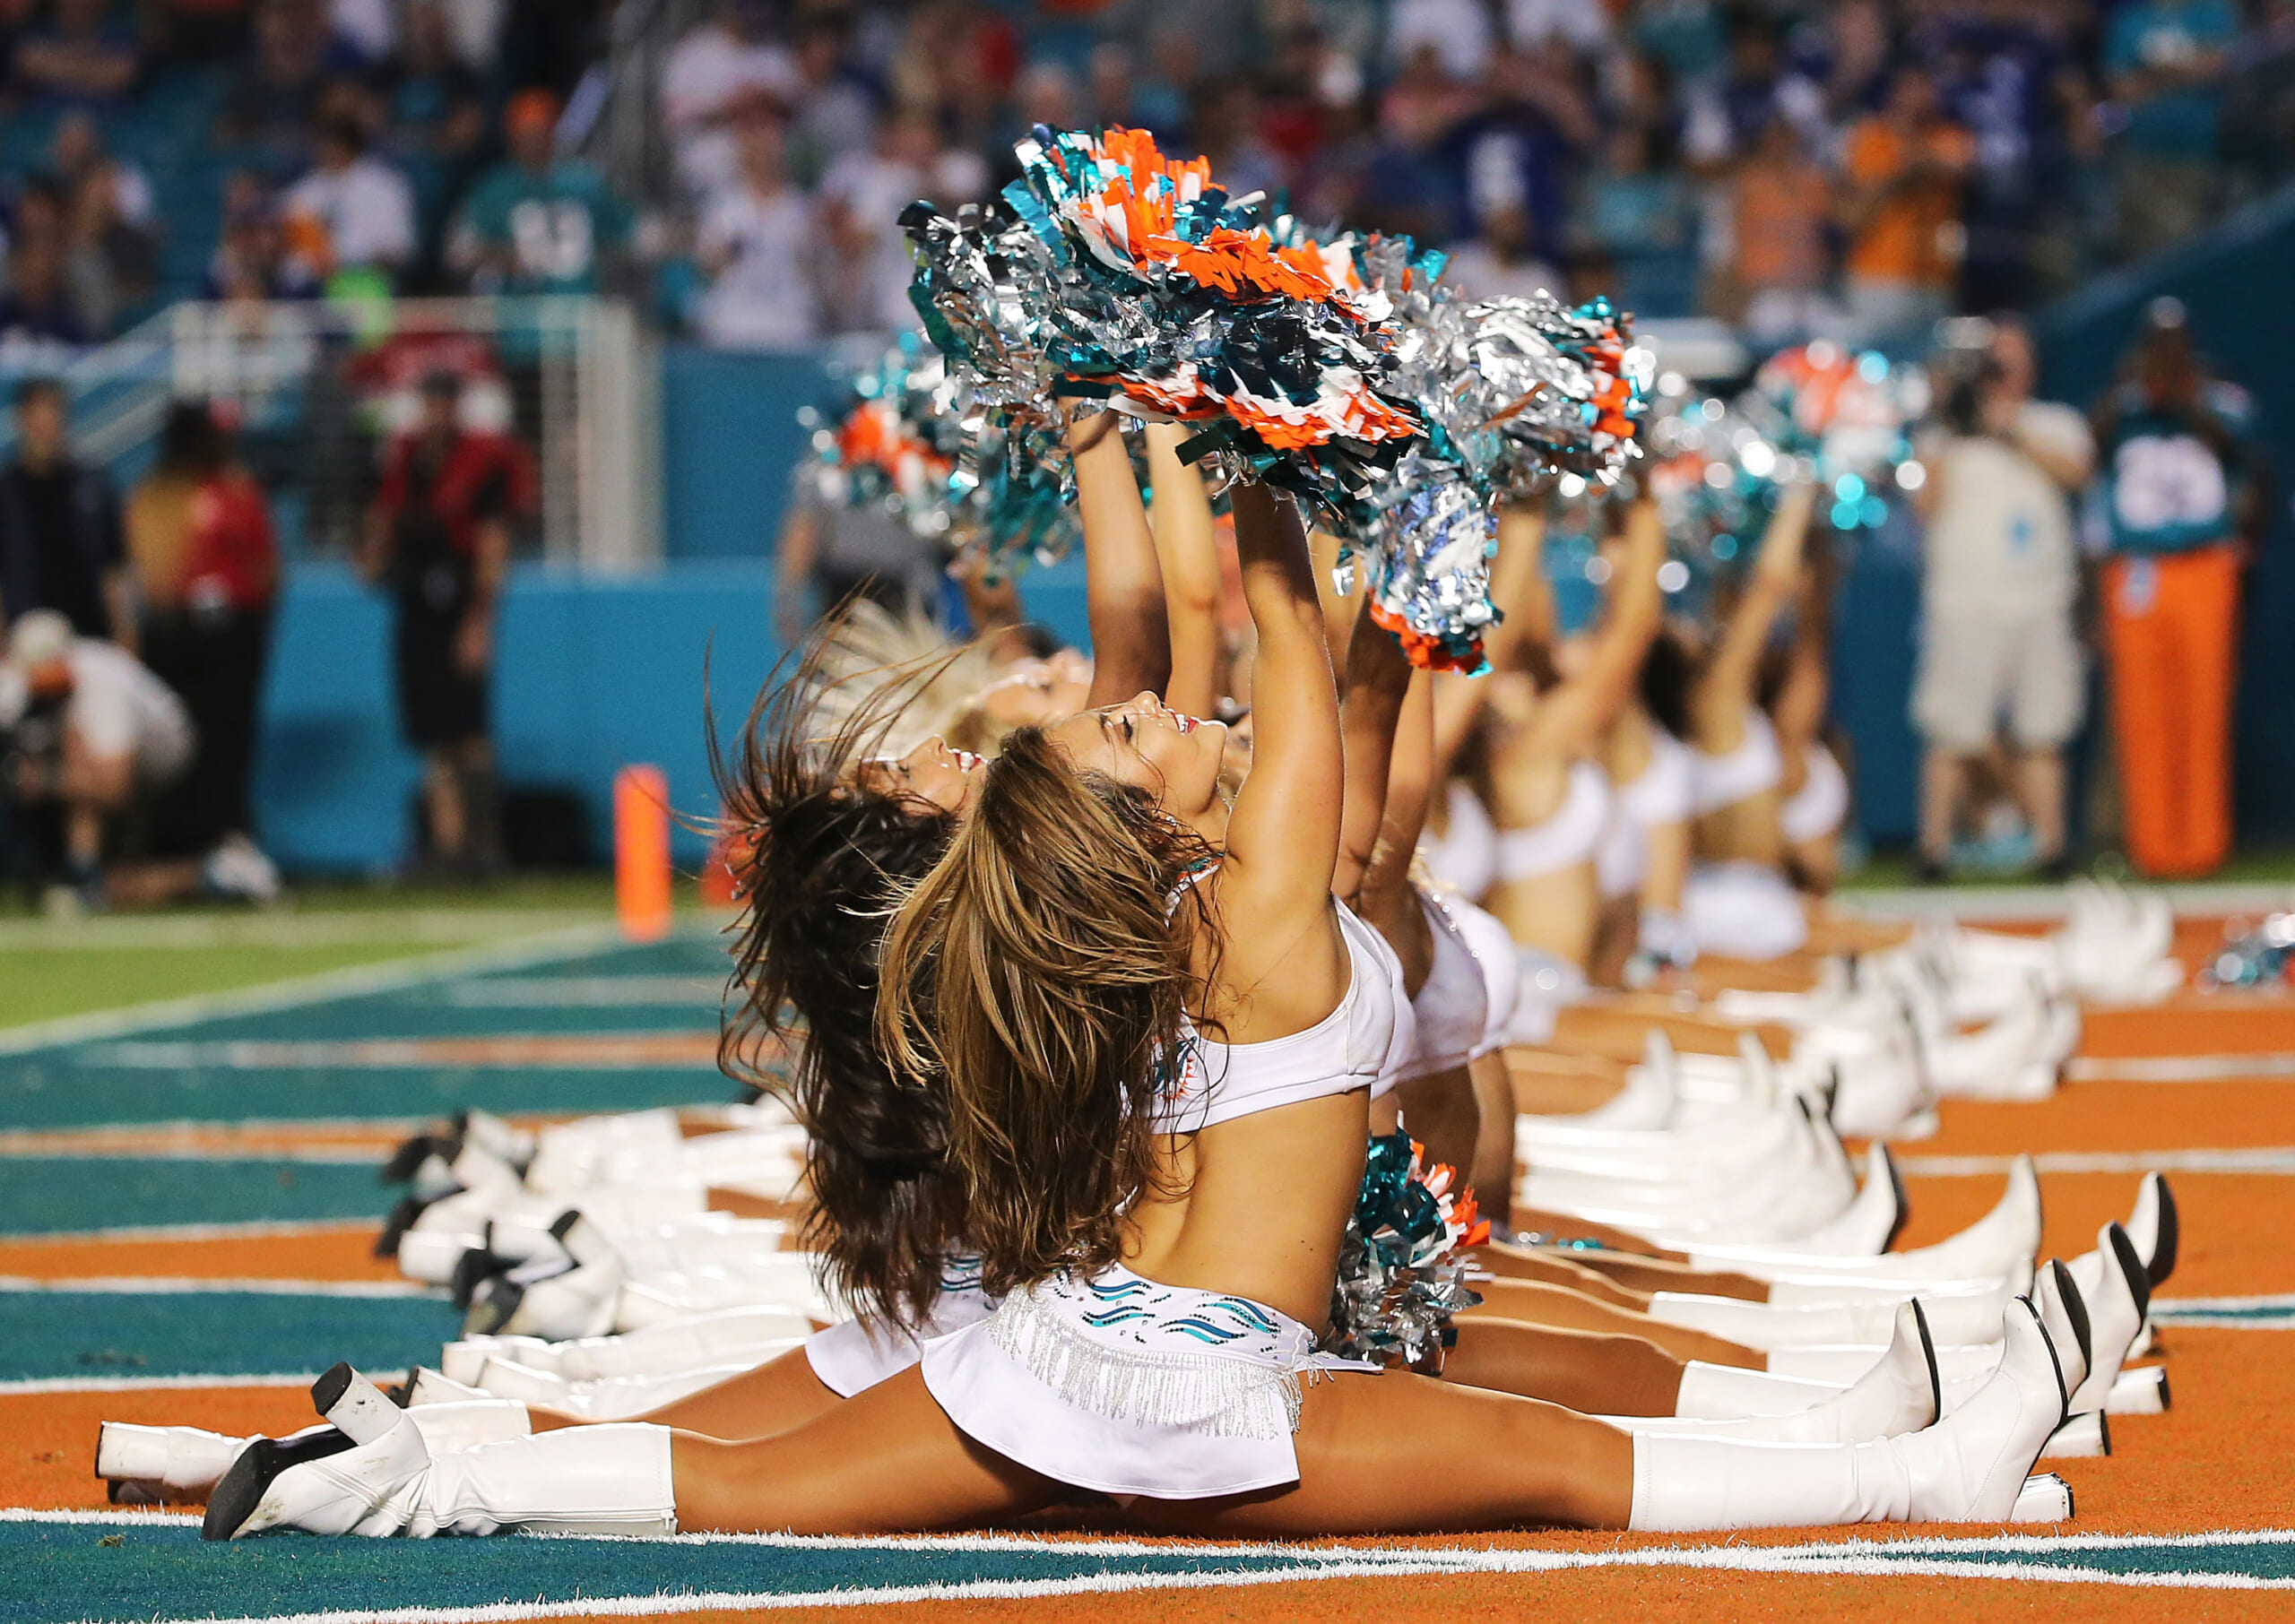 Kick Off Football Season Right with the NFL’s Hottest Cheerleaders.